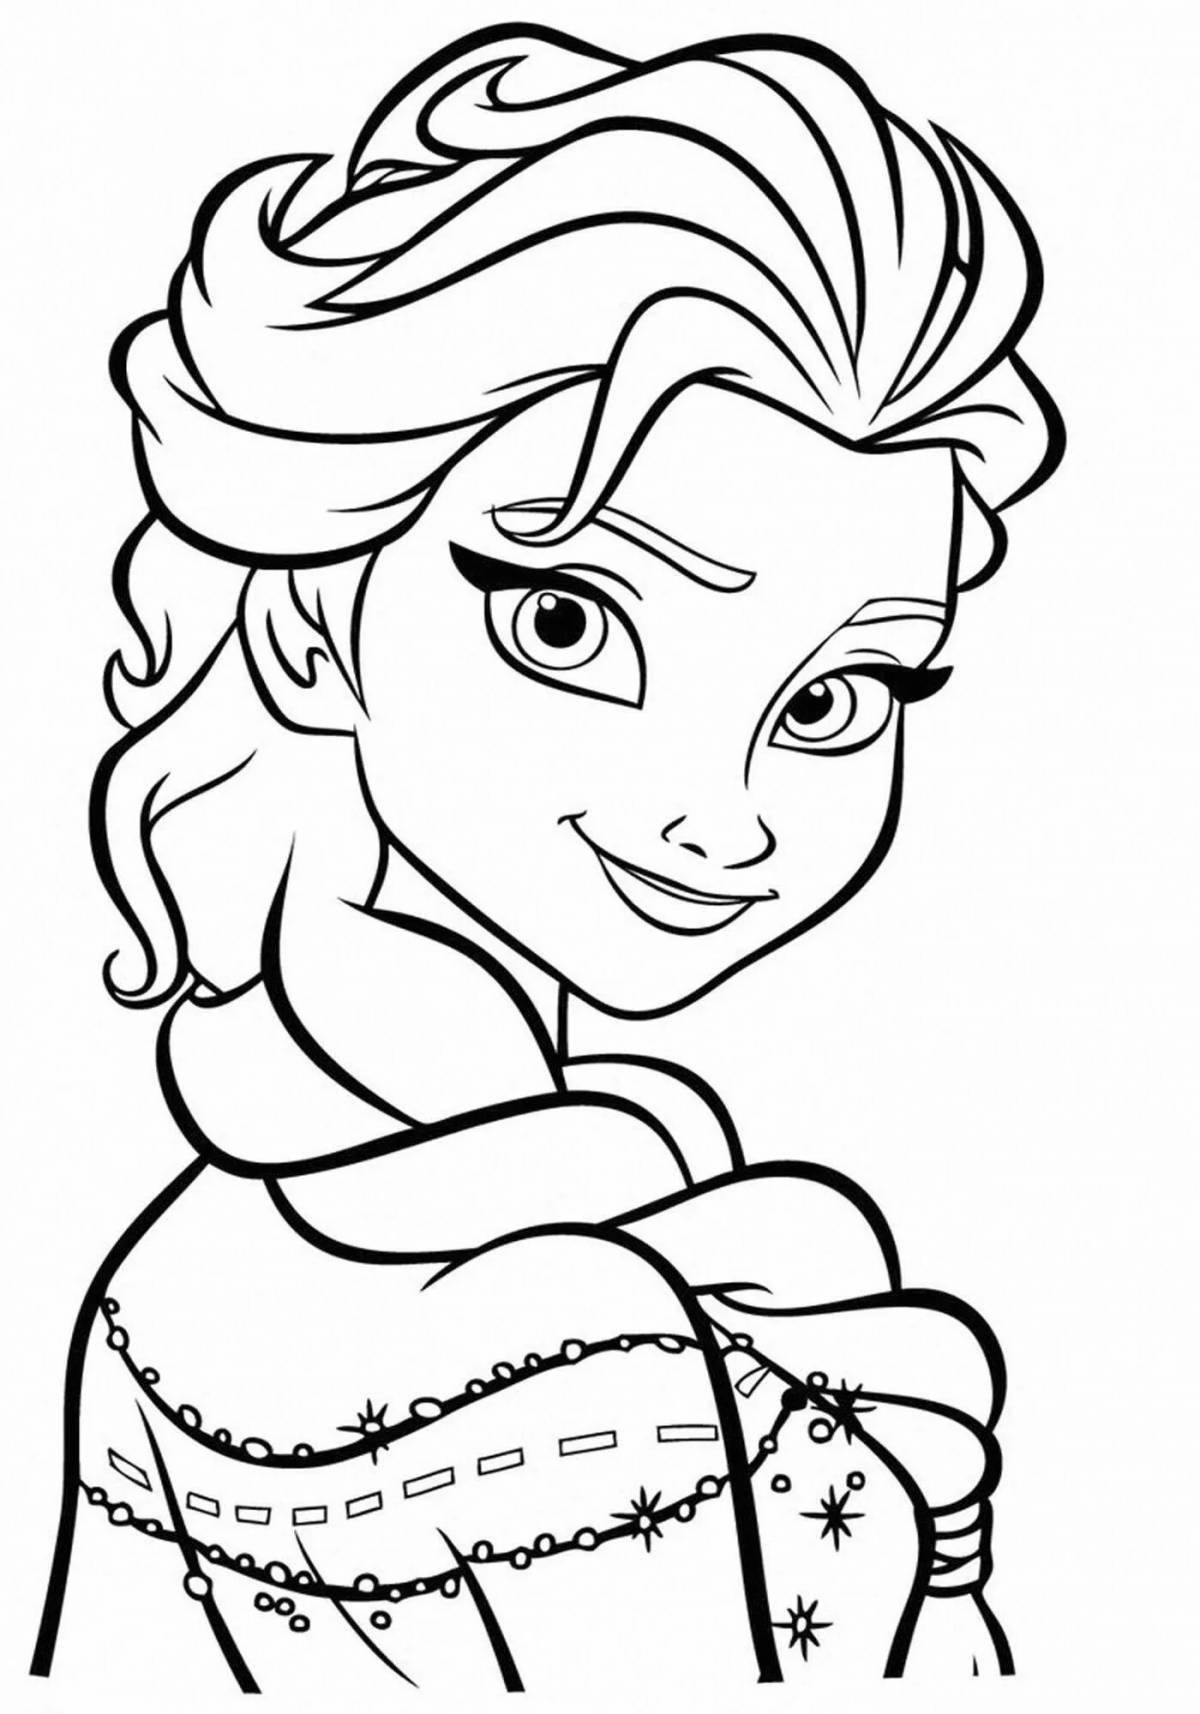 Coloring page violent cold heart